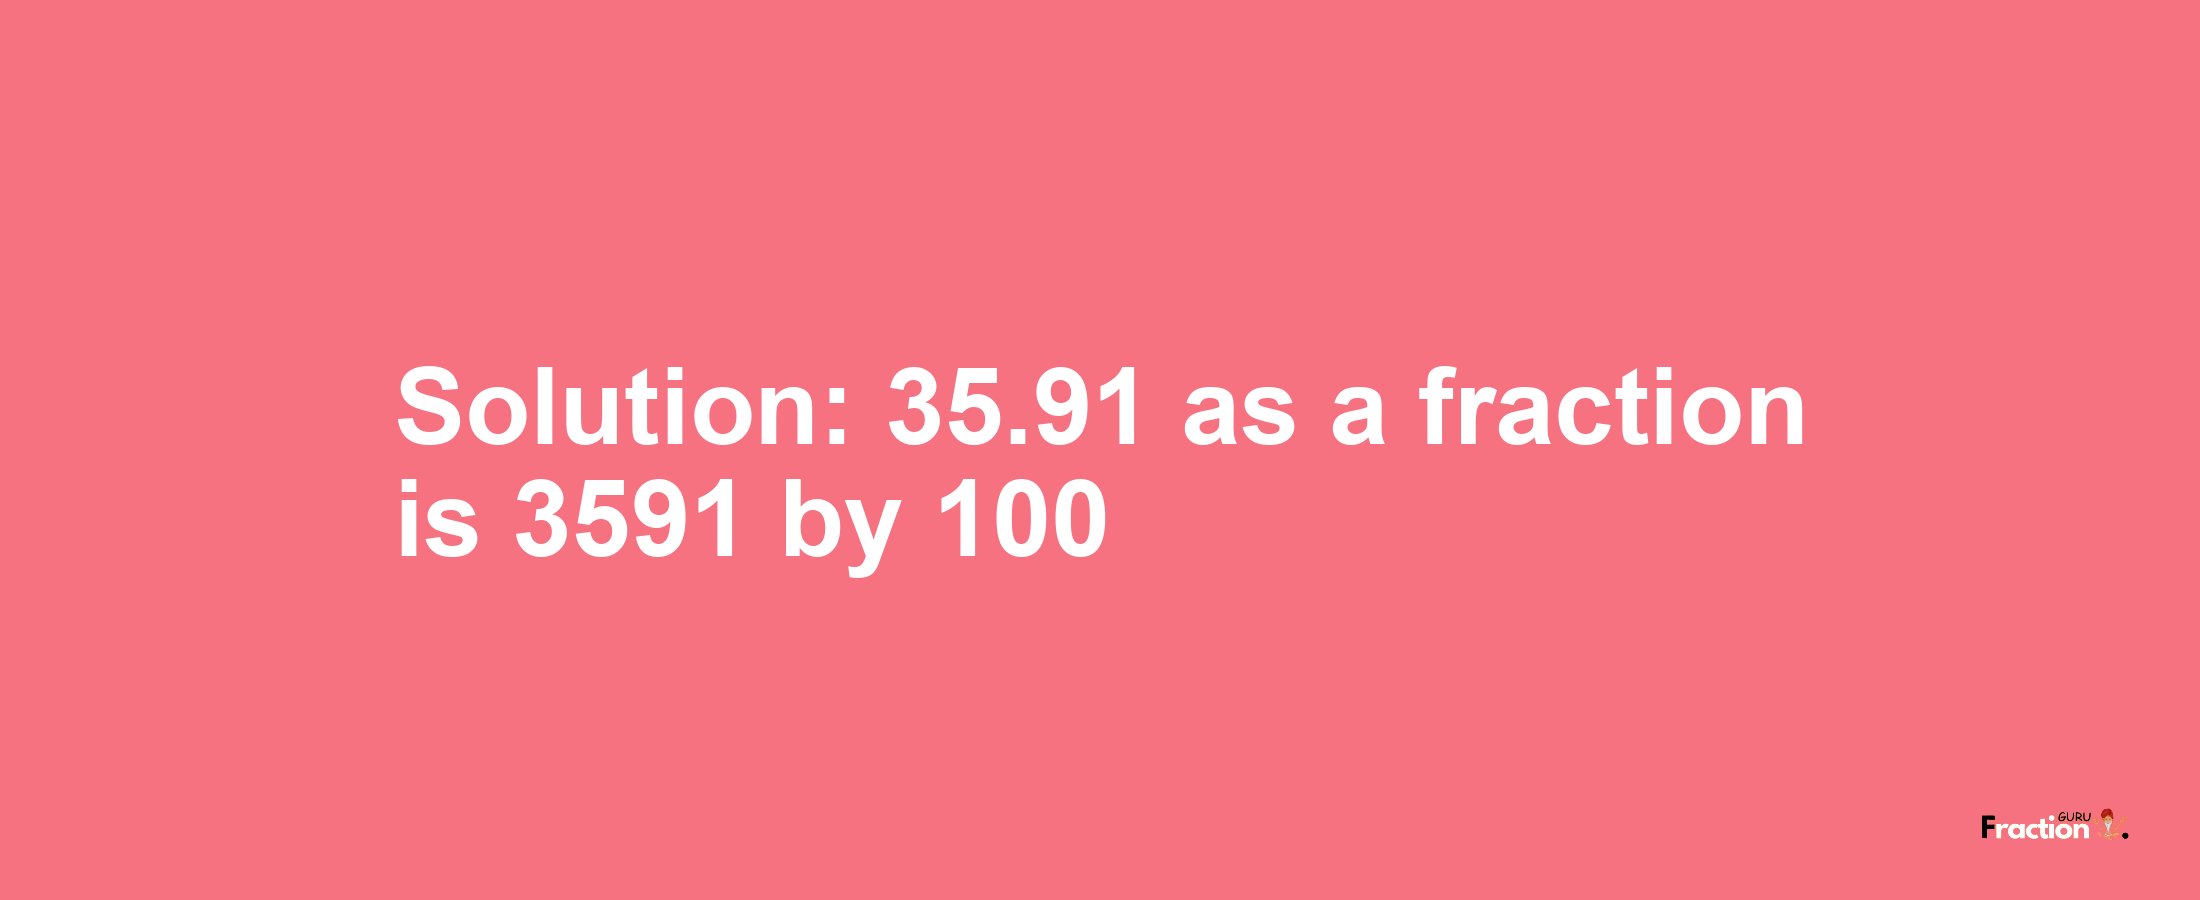 Solution:35.91 as a fraction is 3591/100